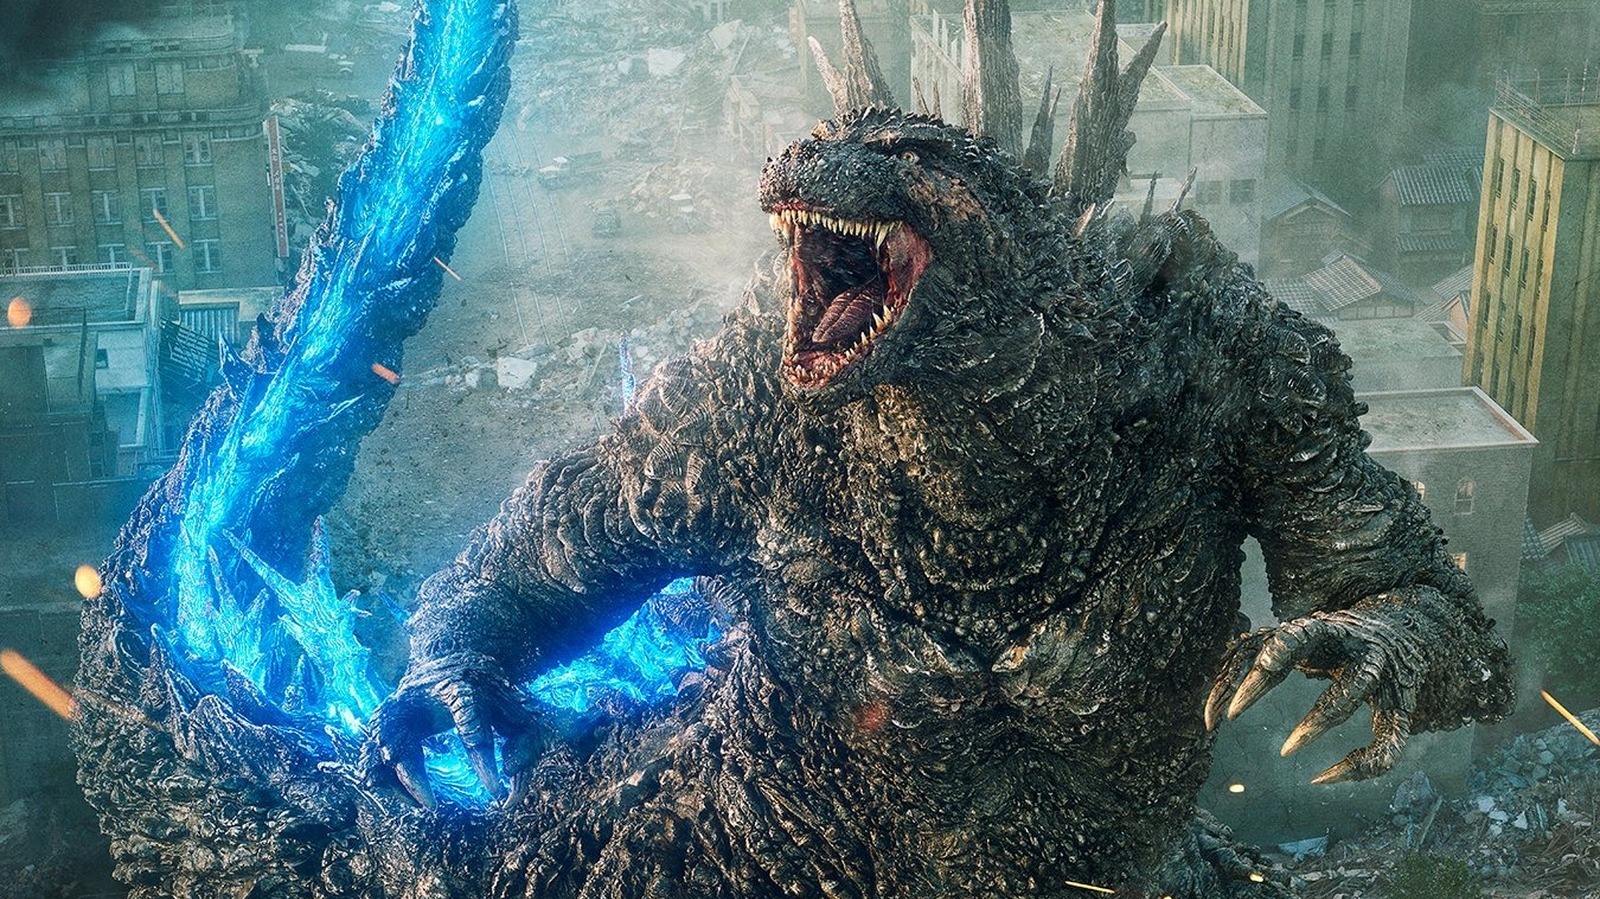 Godzilla Minus One's Strangest Reveal Raises All Kinds Of Unanswered Questions